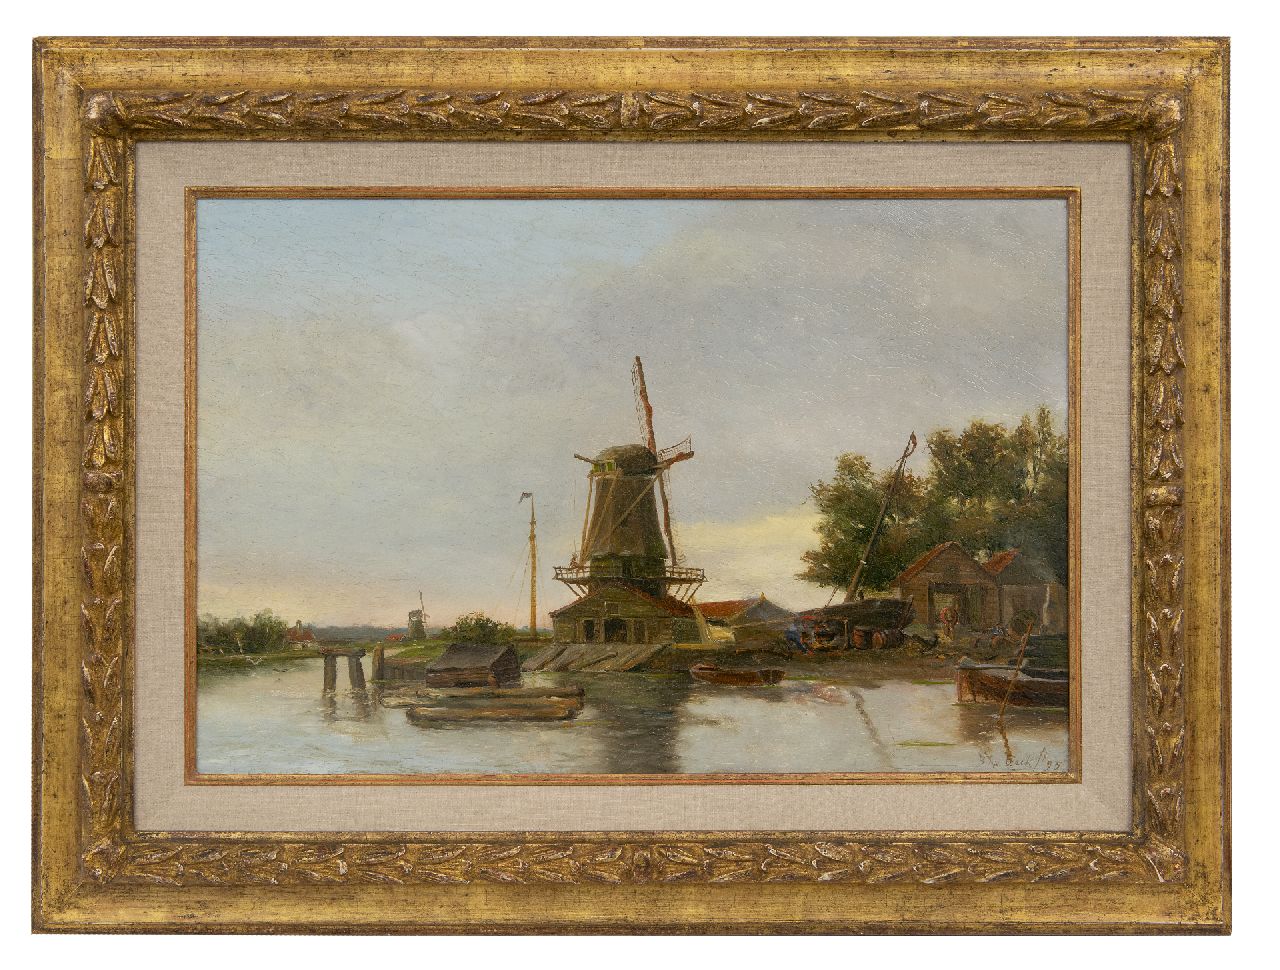 Beek B.A. van | Bernardus Antonie van Beek, A lumber mill and a shipyard on a river, oil on panel 38.2 x 57.9 cm, signed l.r. and dated '95